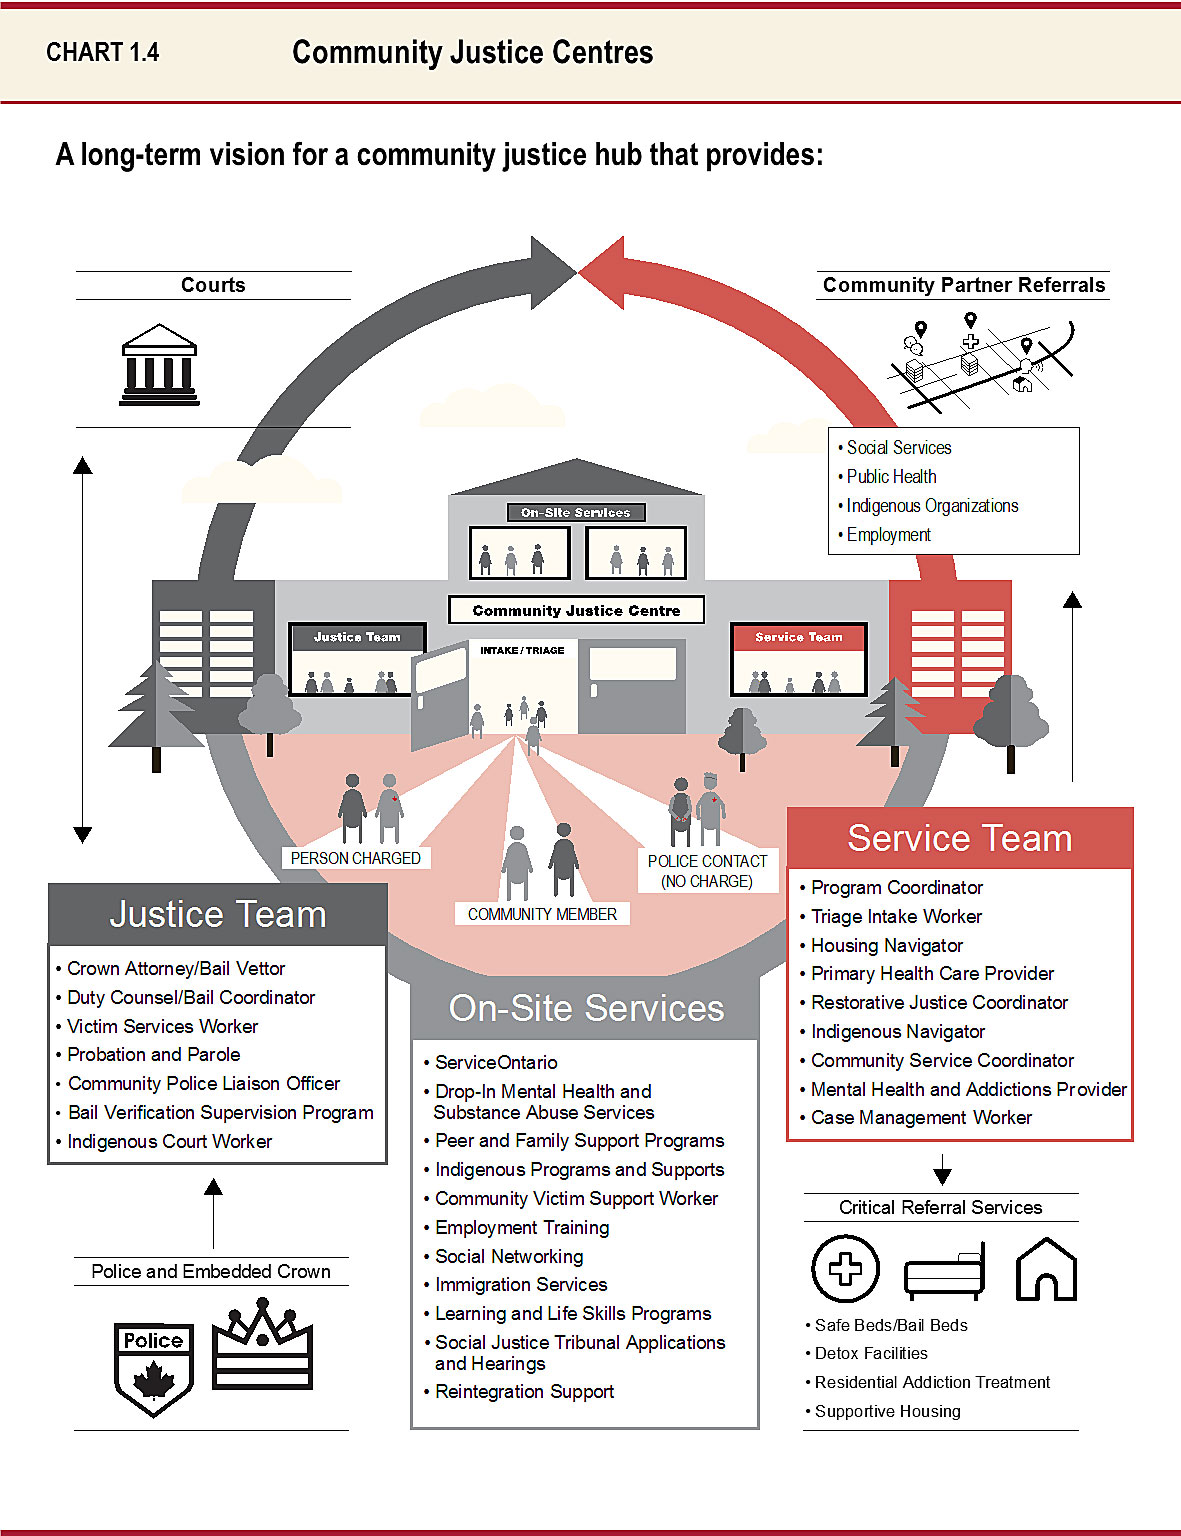 Chart 1.4: Community Justice Centres